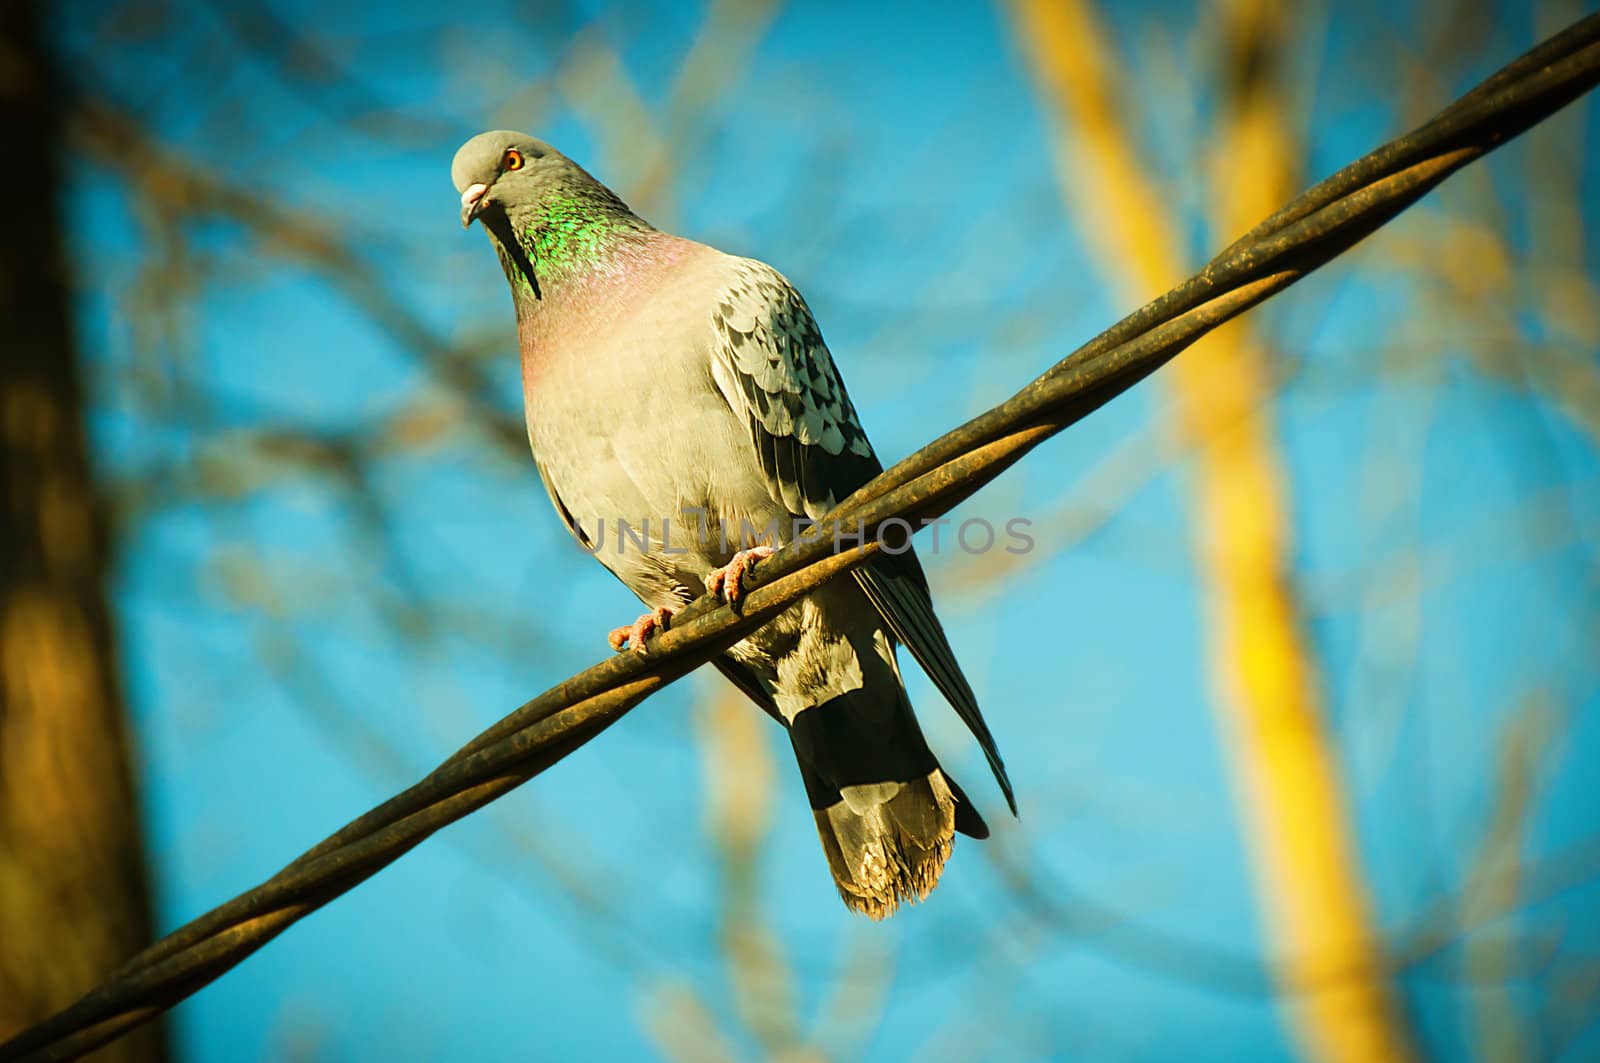 The beautiful pigeon sits on a wire and looks afar